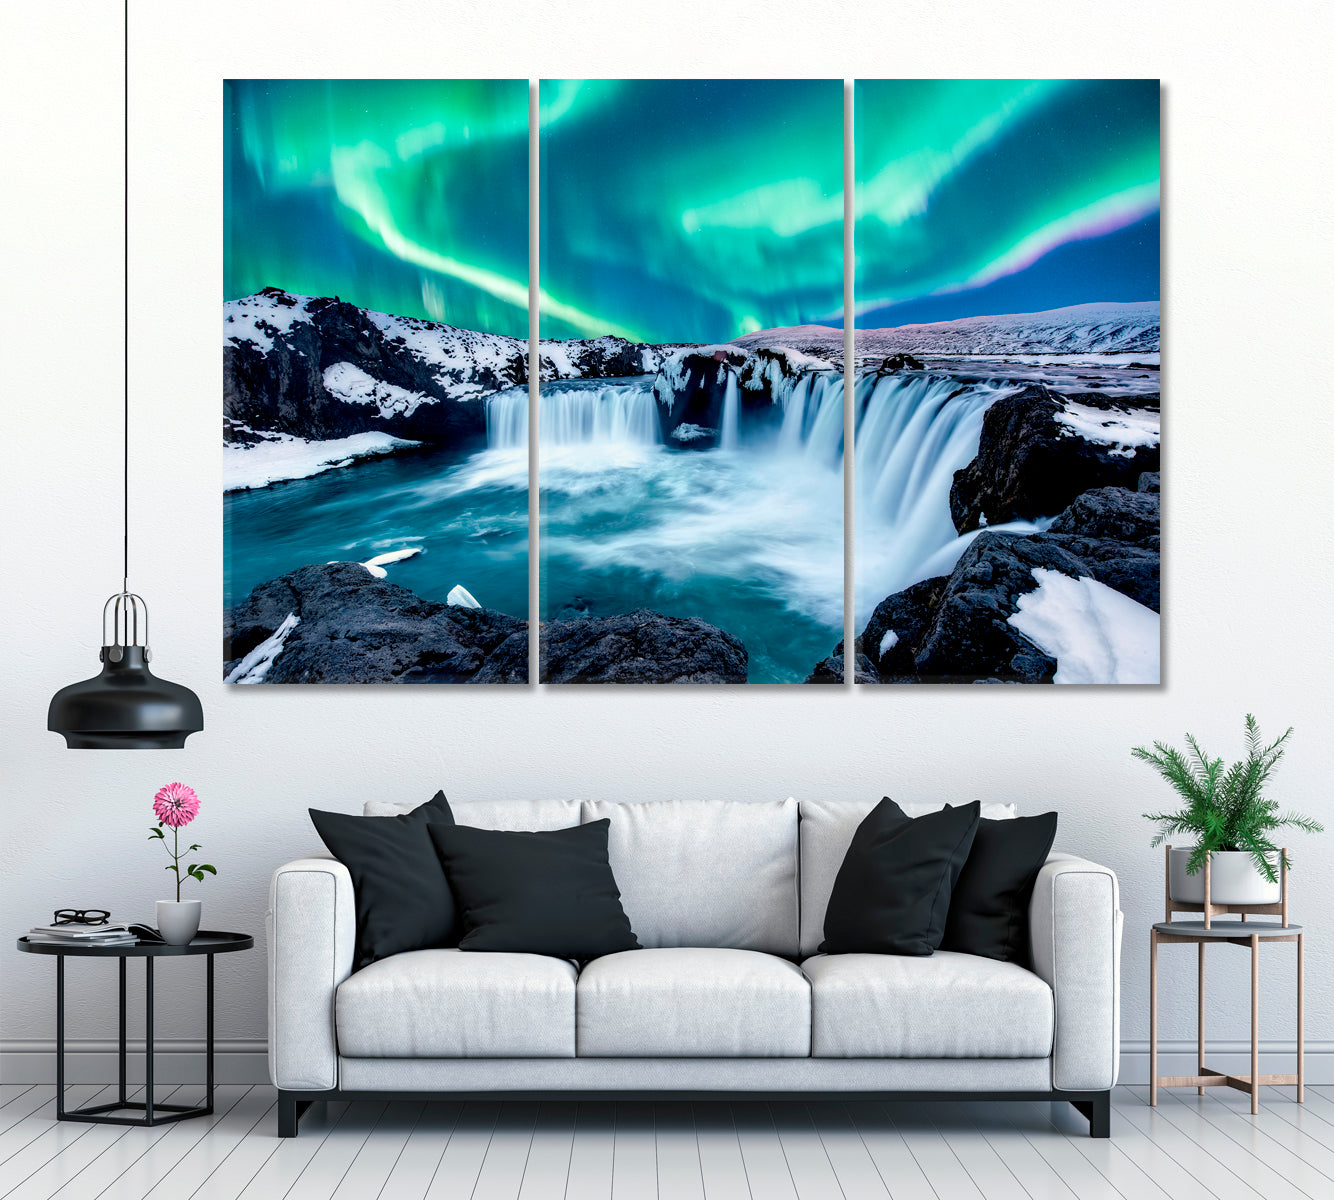 Aurora Borealis over Godafoss Waterfall in Iceland Canvas Print ArtLexy 3 Panels 36"x24" inches 